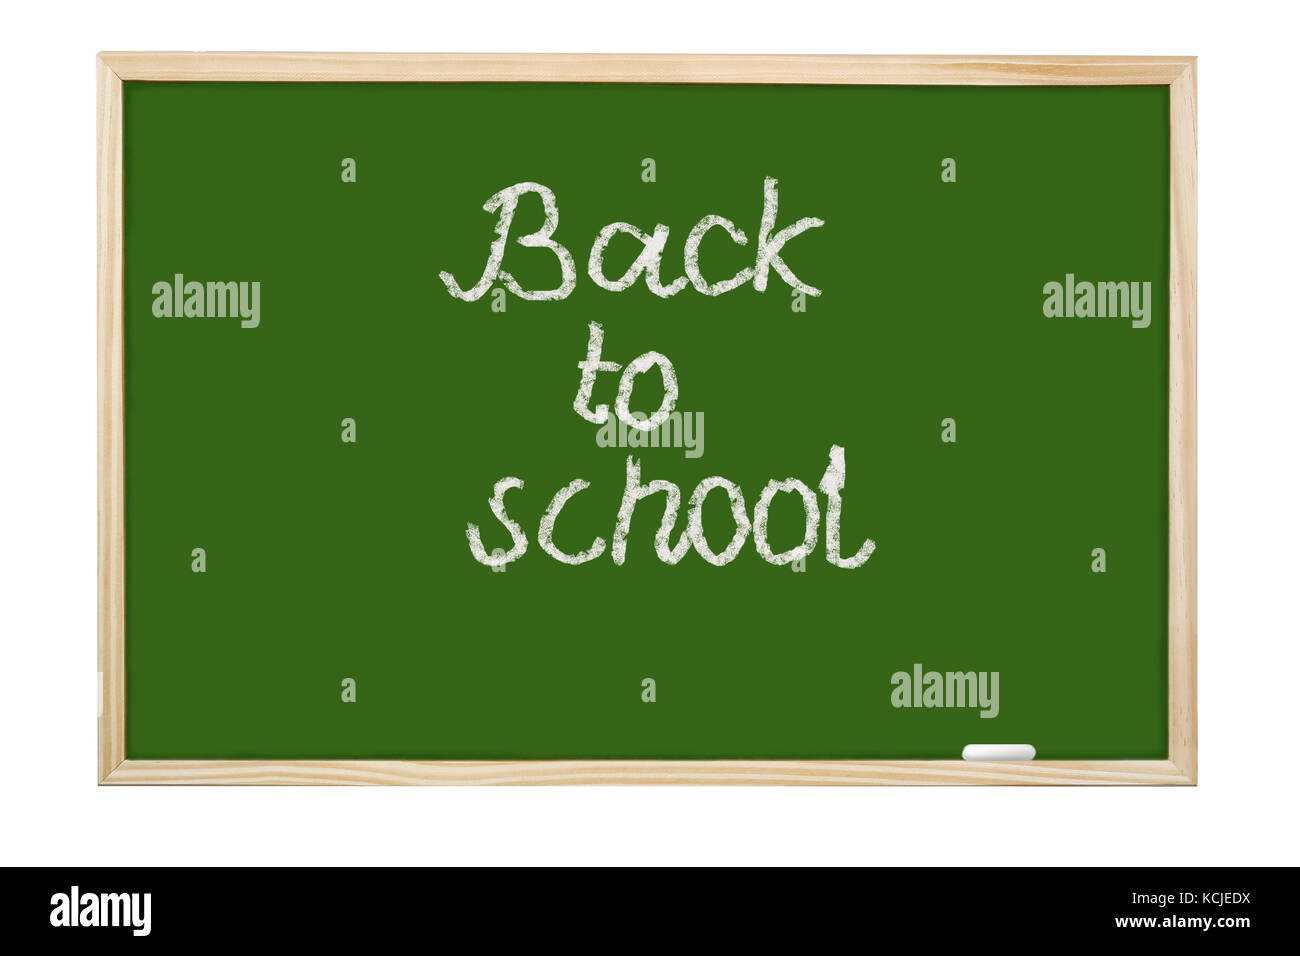 Blank green class board with Back to school handwriting - isolated on white Stock Photo